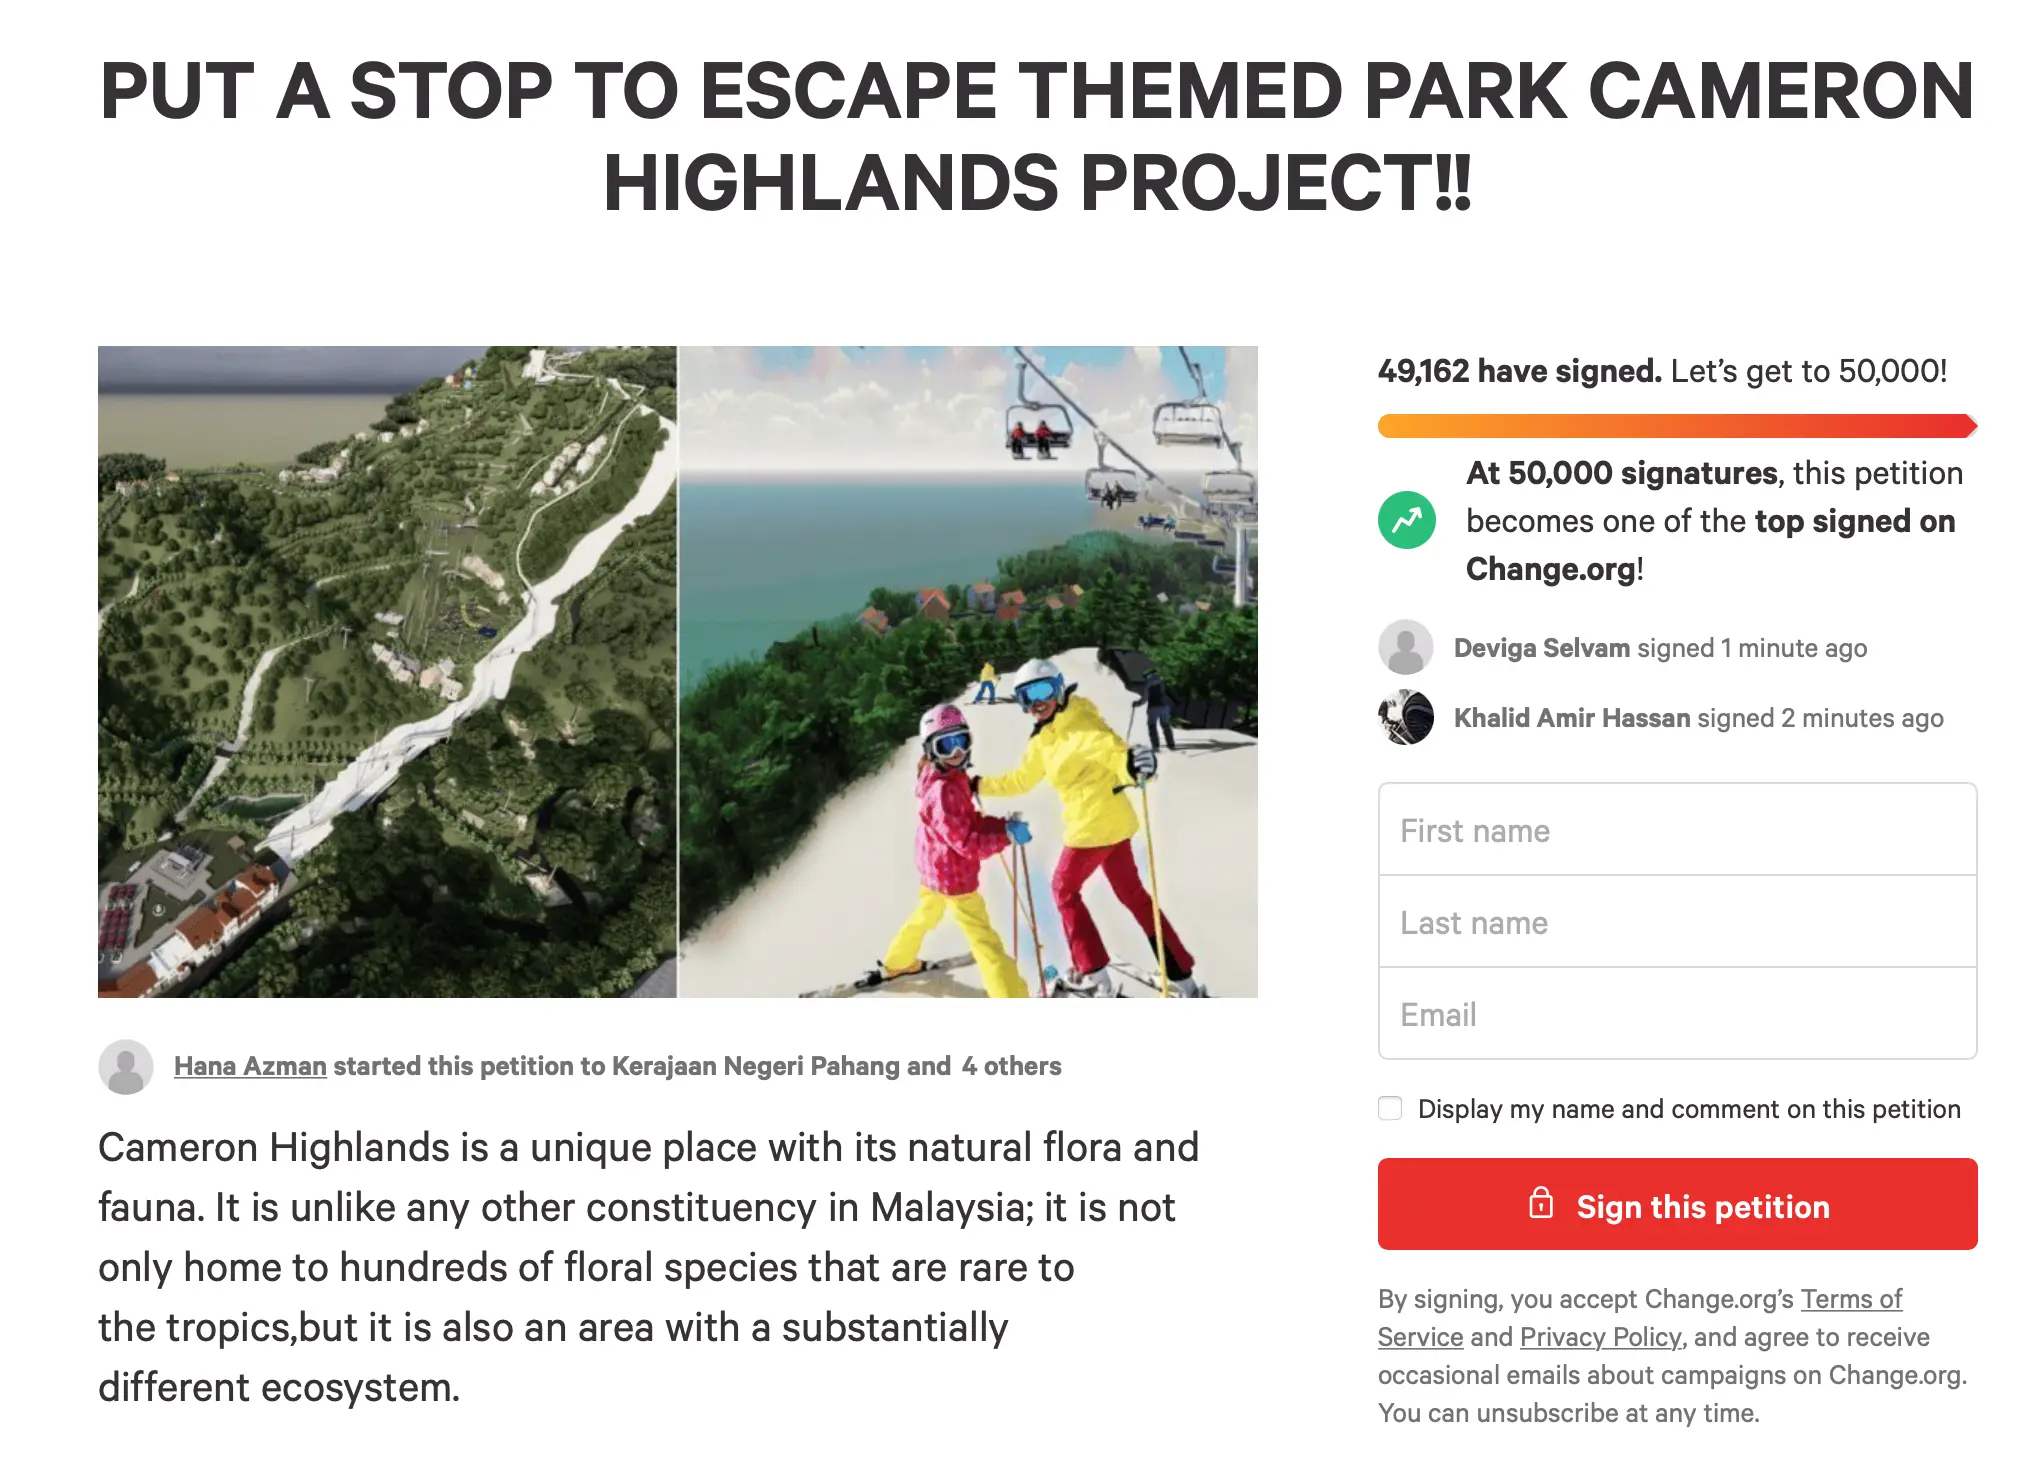 Almost 50,000 signatures collected in protest against the cameron highlands escape project | weirdkaya